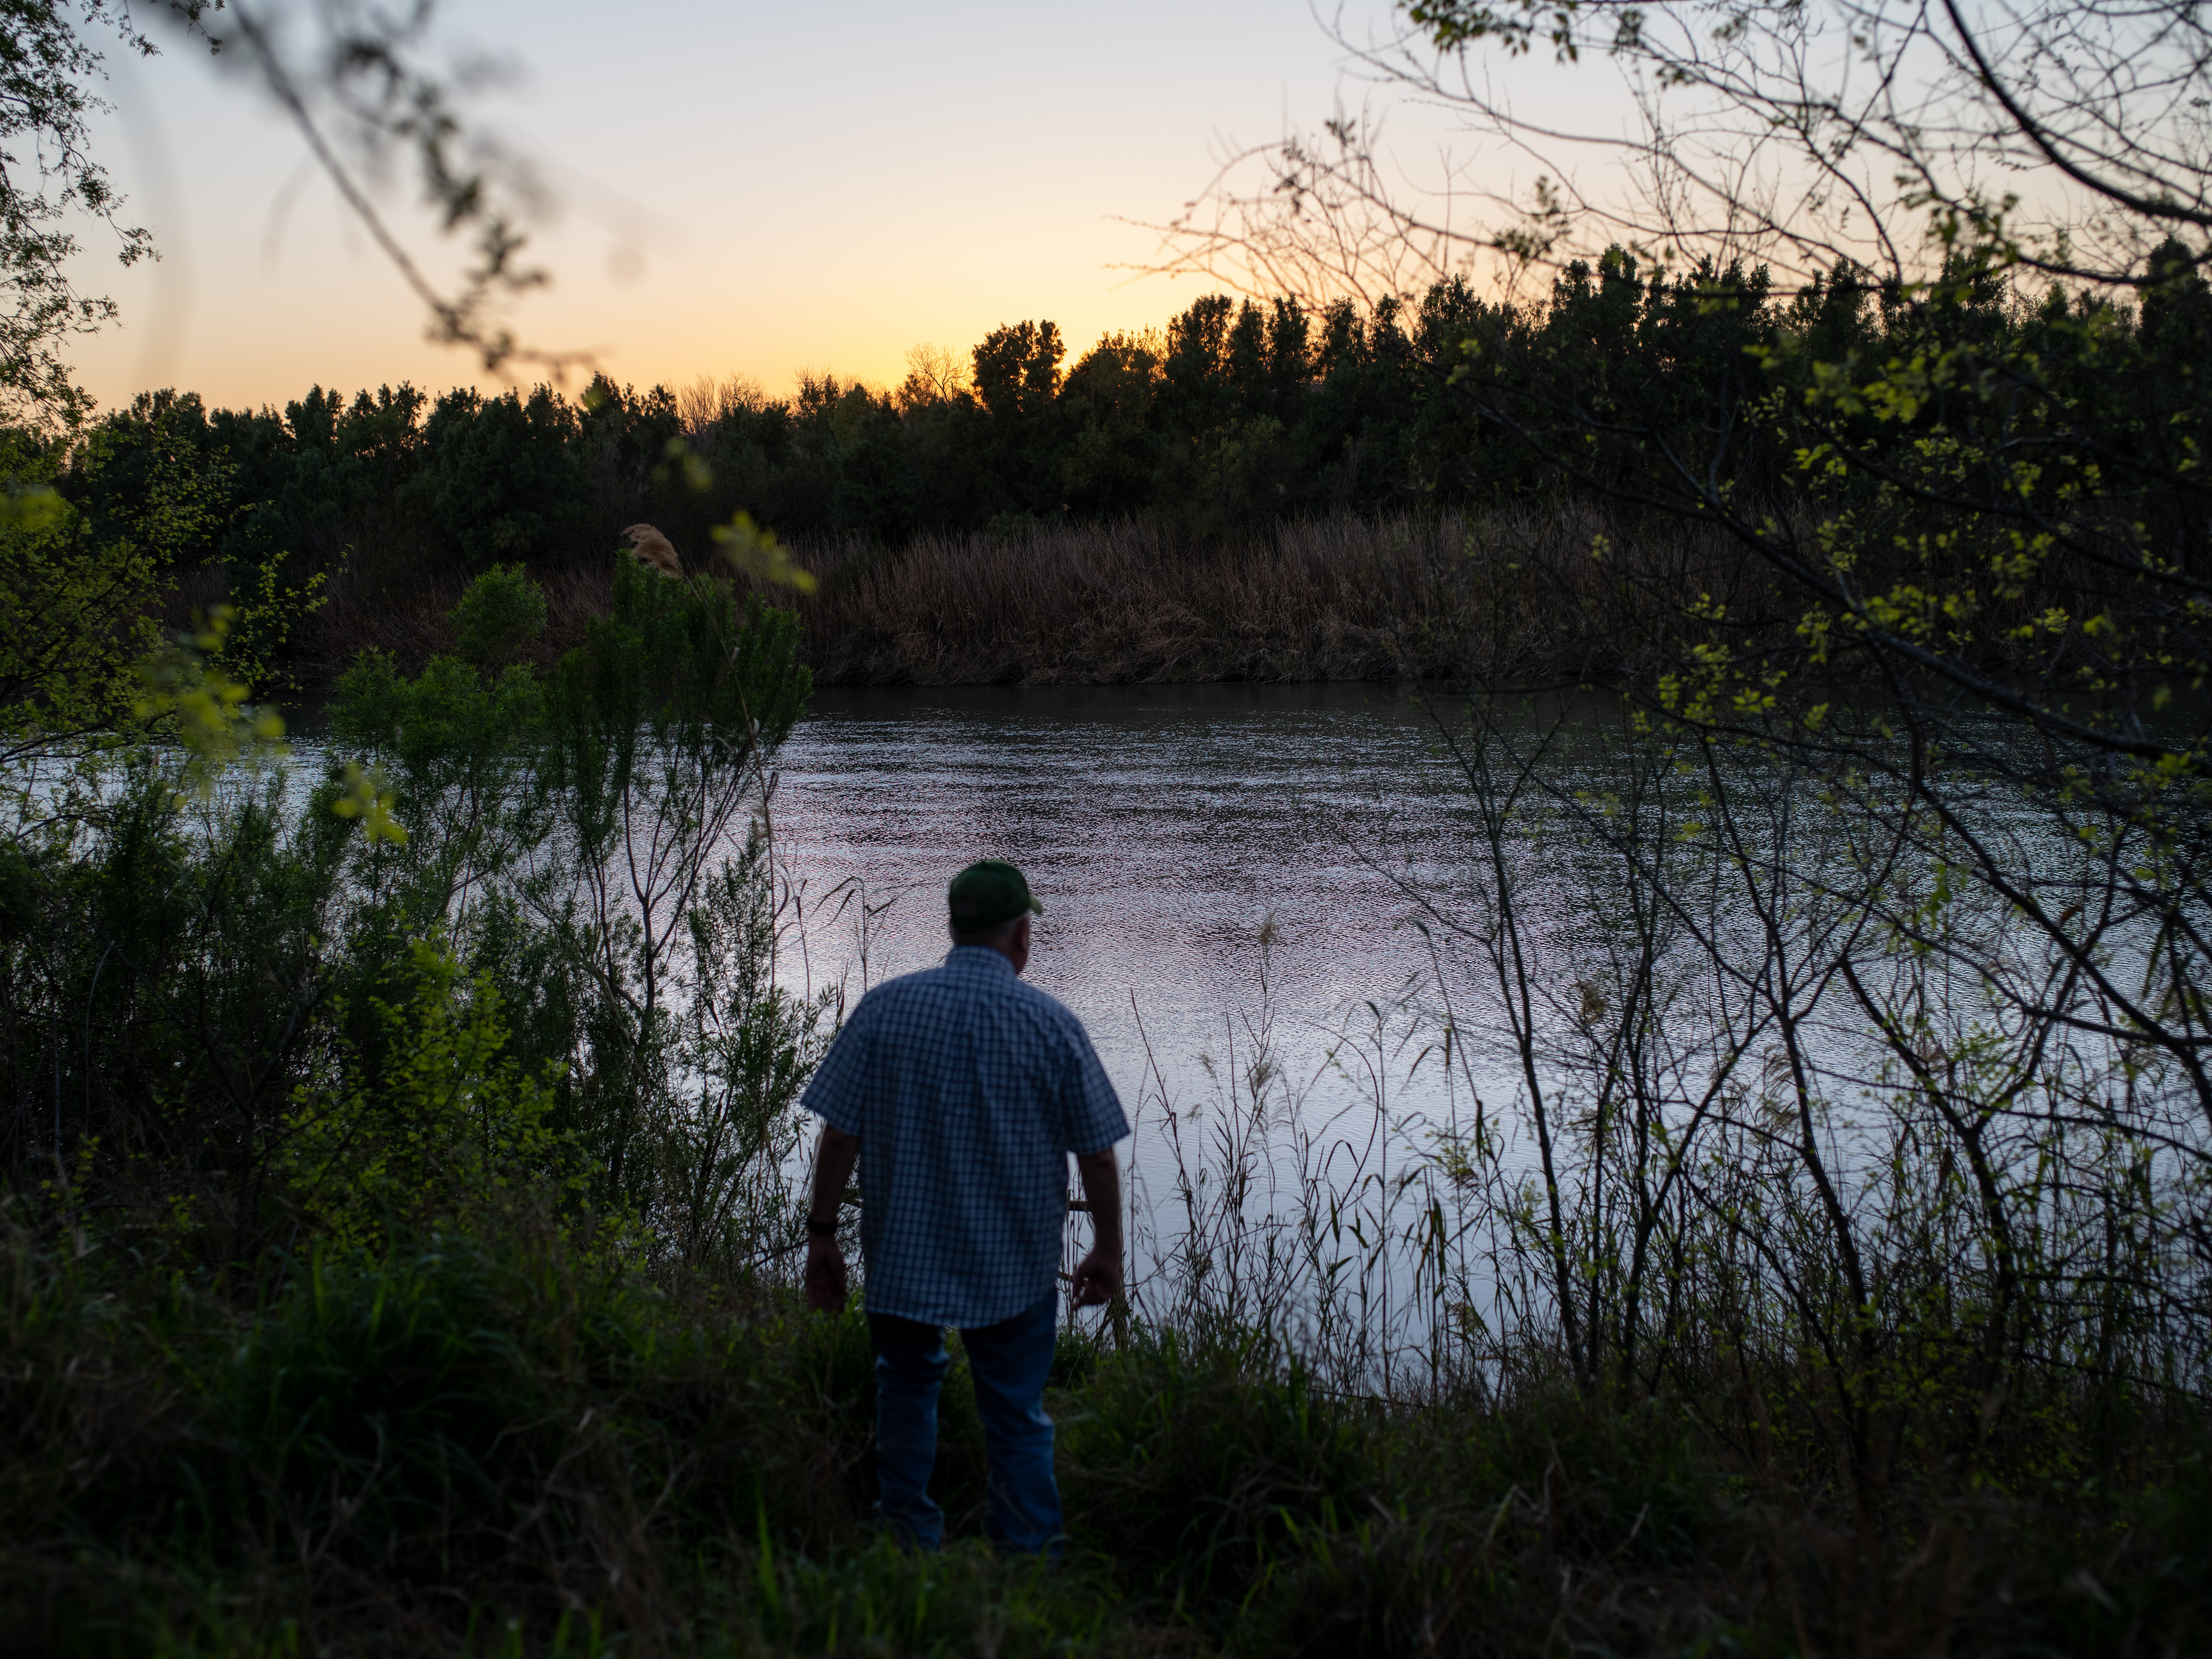 A rancher on the bank of the Rio Grande. Image: Bloomberg/Getty